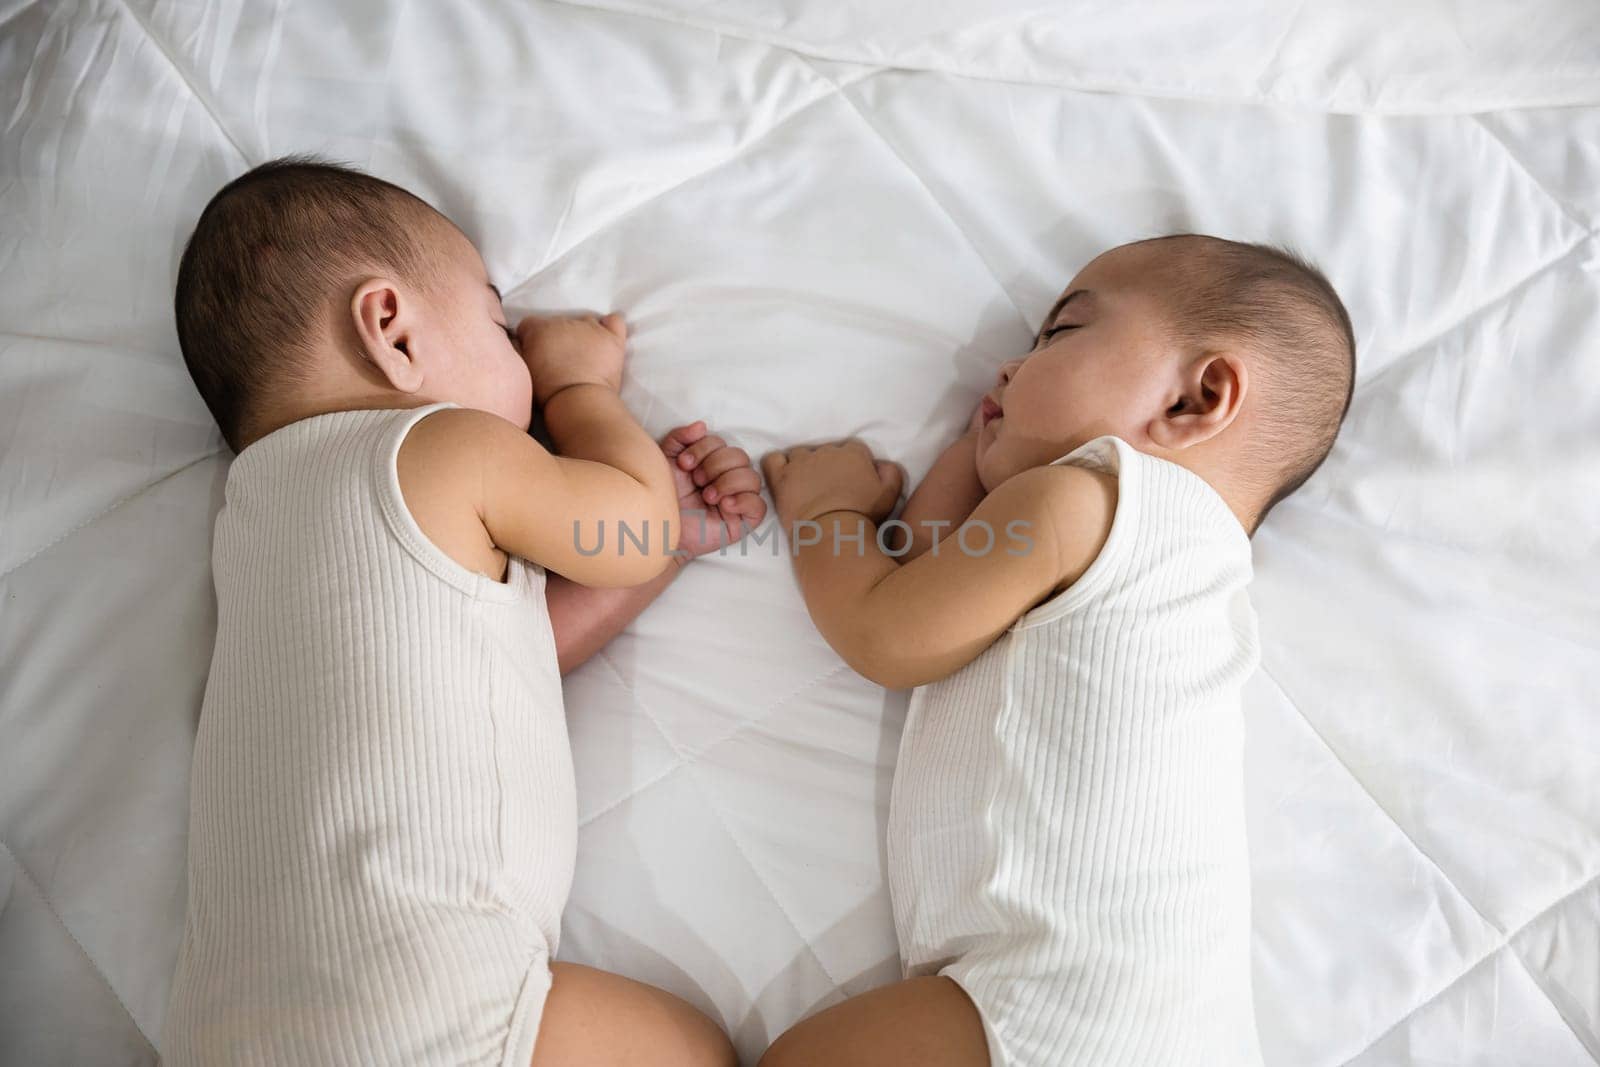 Happy childhood, Sleeping newborn identical boy twins on the bed on bedroom, Asian two adorable twin babies boy, family people infant